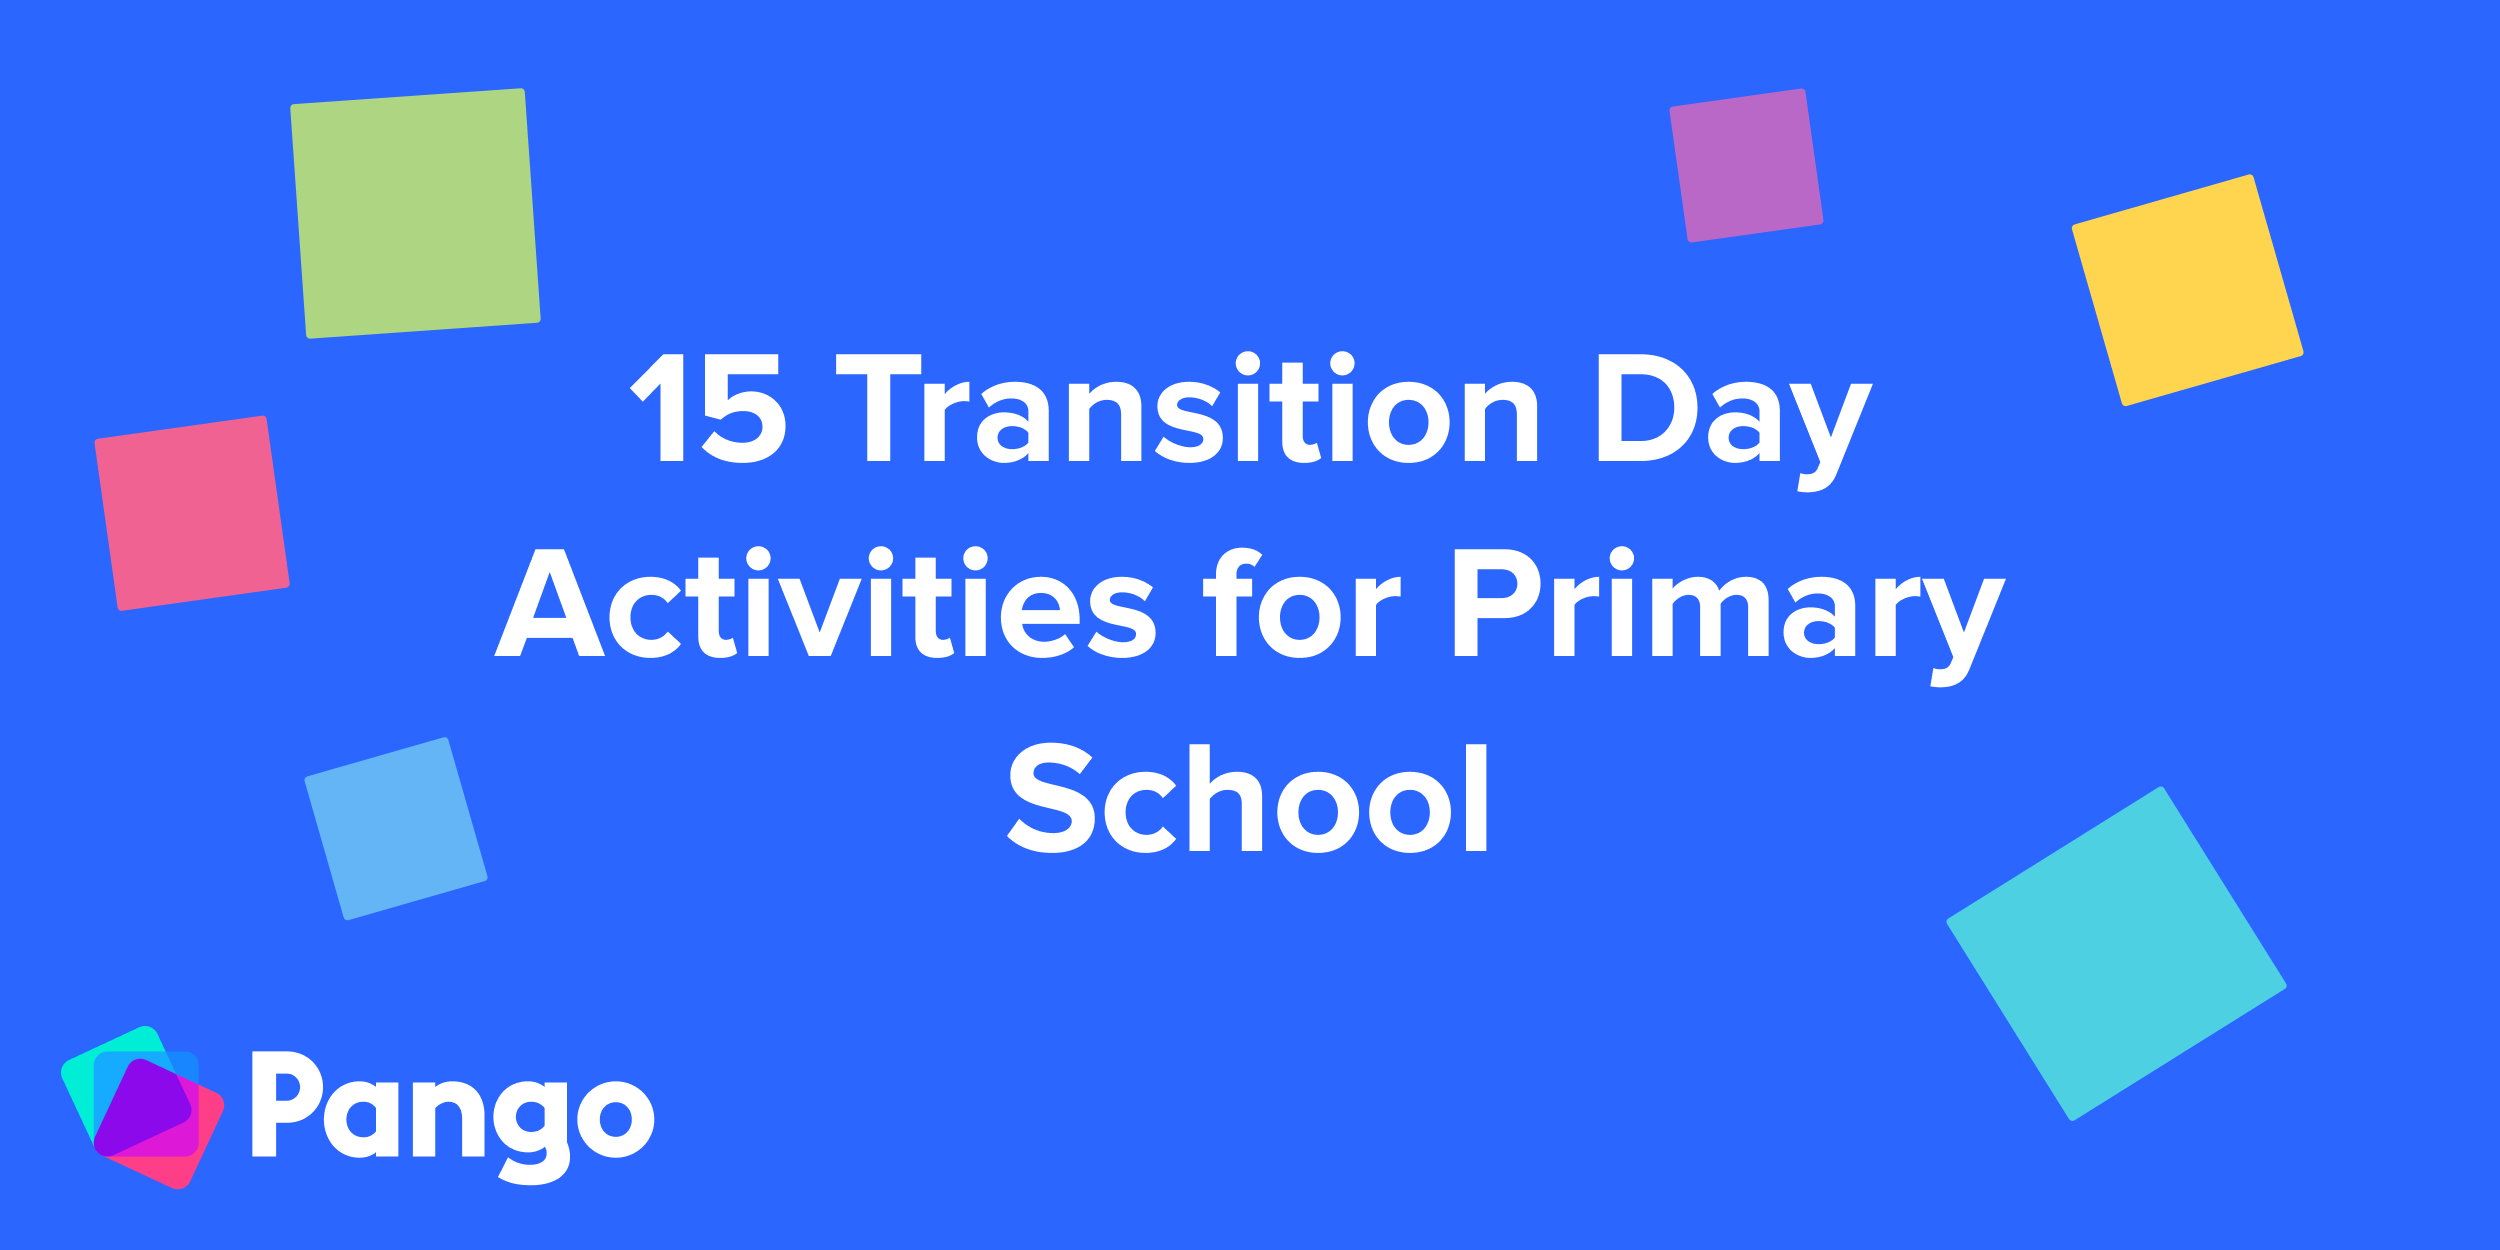 15 Transition Day Activities for Primary School